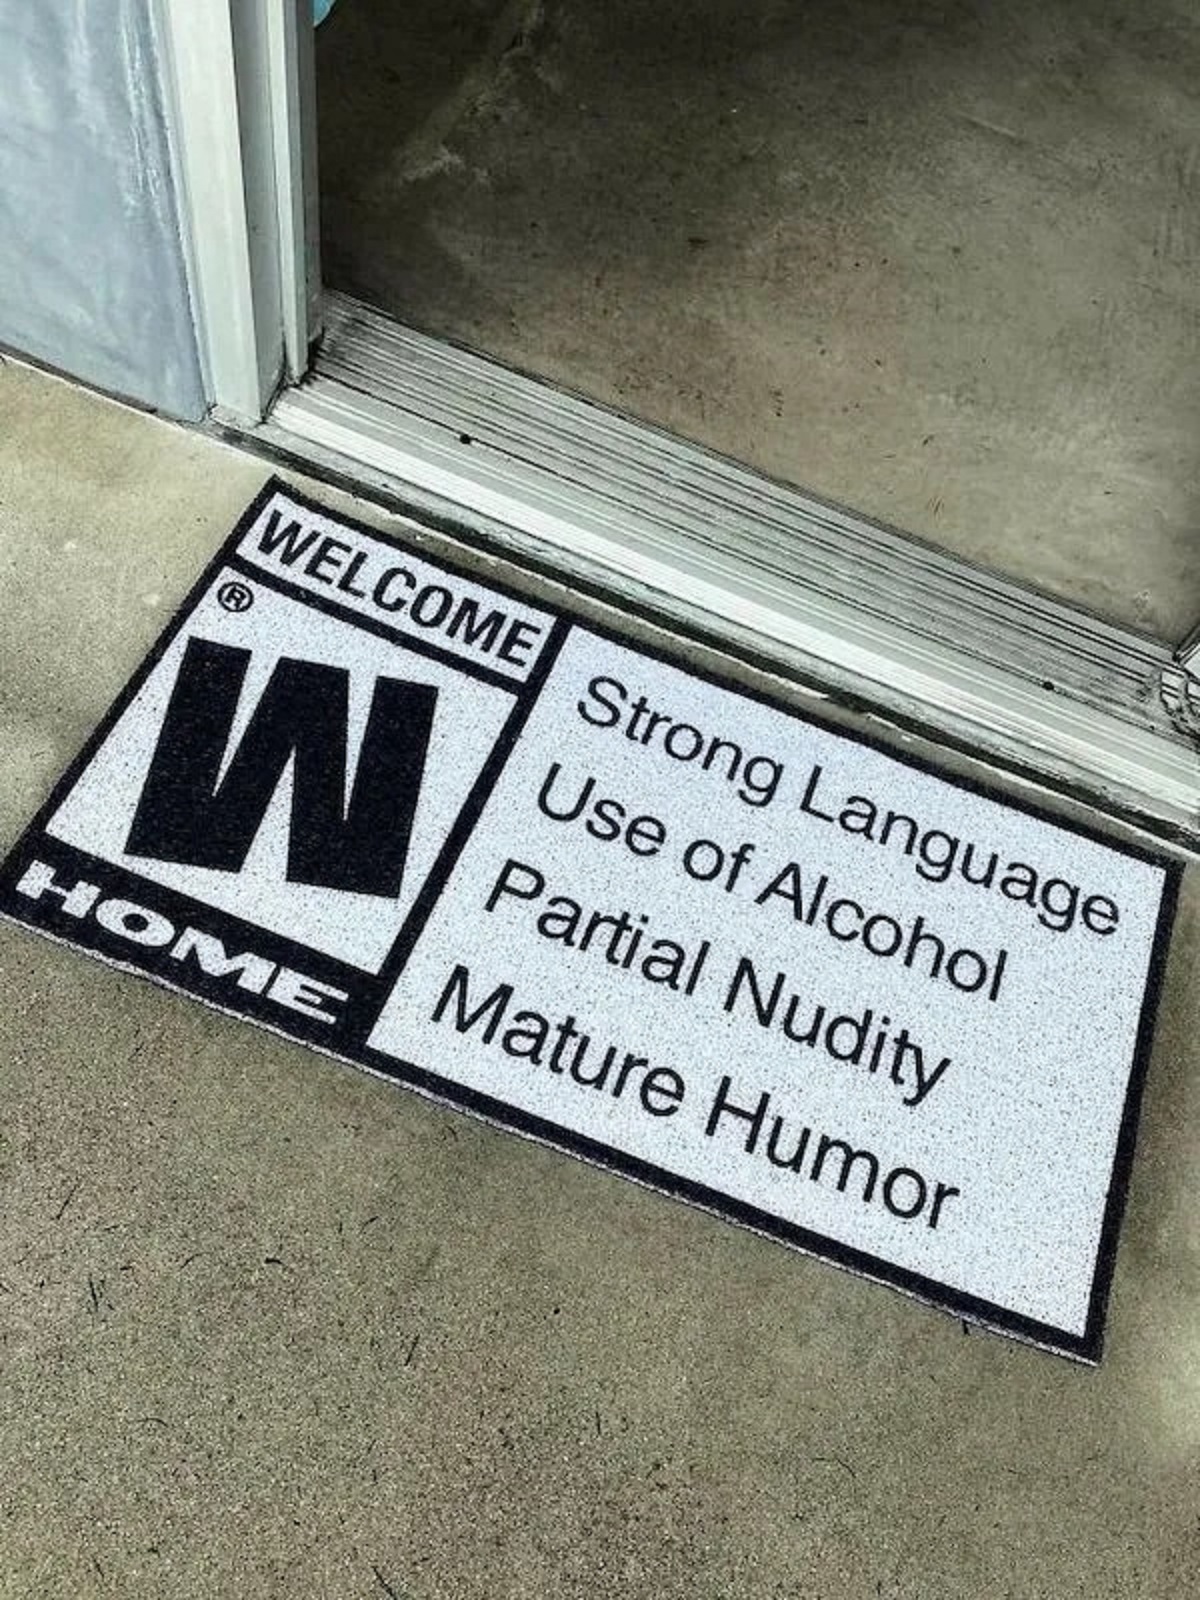 spicy memes - welcome doormat by drought - Welcome W Home Strong Language Use of Alcohol Partial Nudity Mature Humor